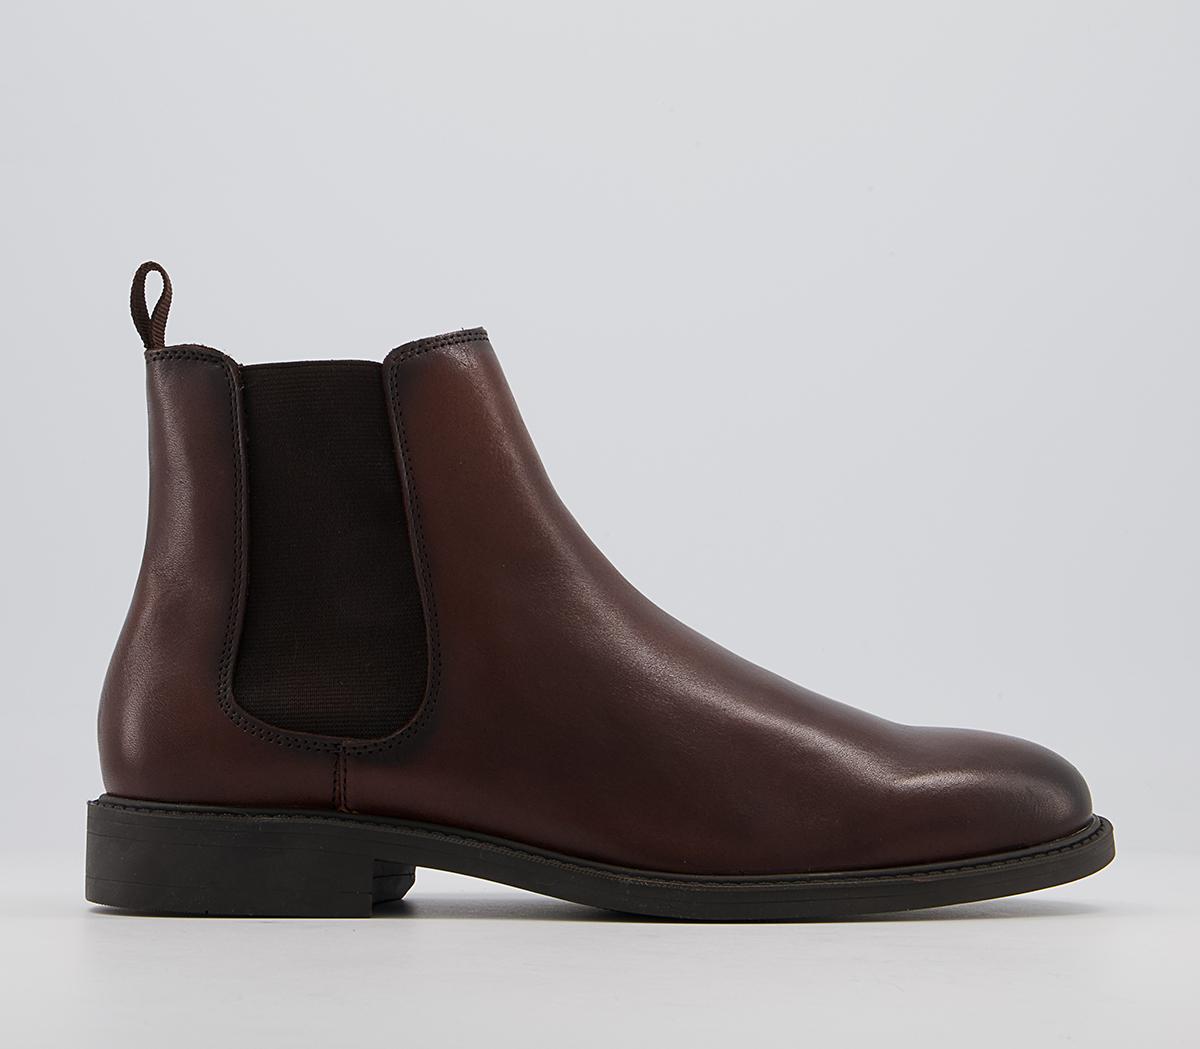 OFFICEBruno Chelsea BootsBrown Leather